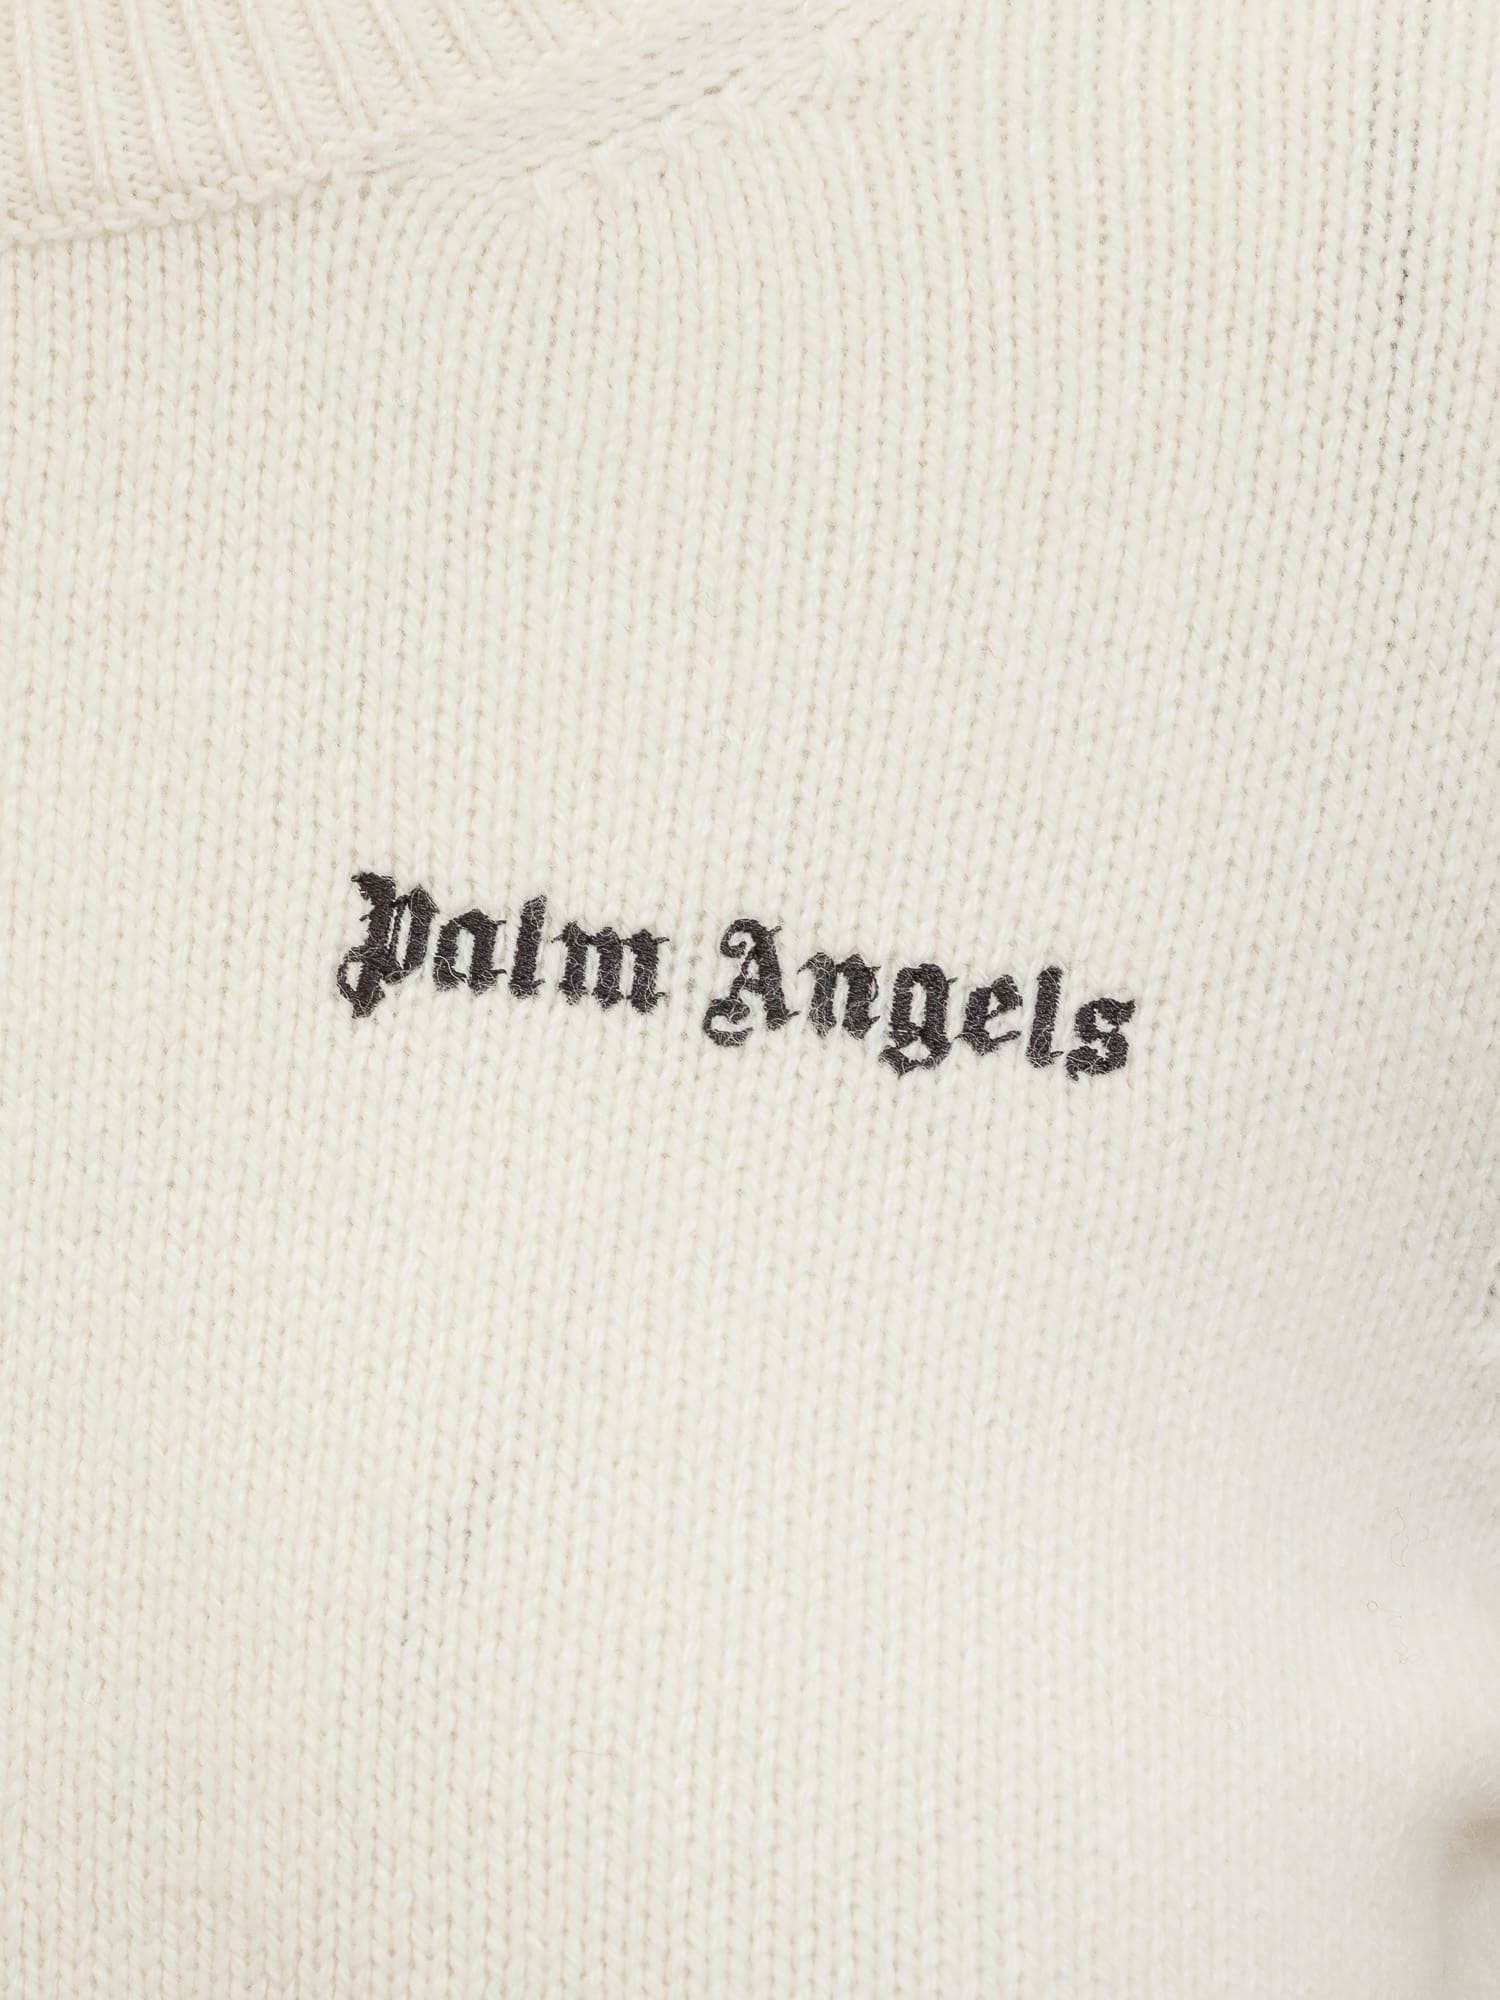 Shop Palm Angels Sweater With Logo In Butter Black